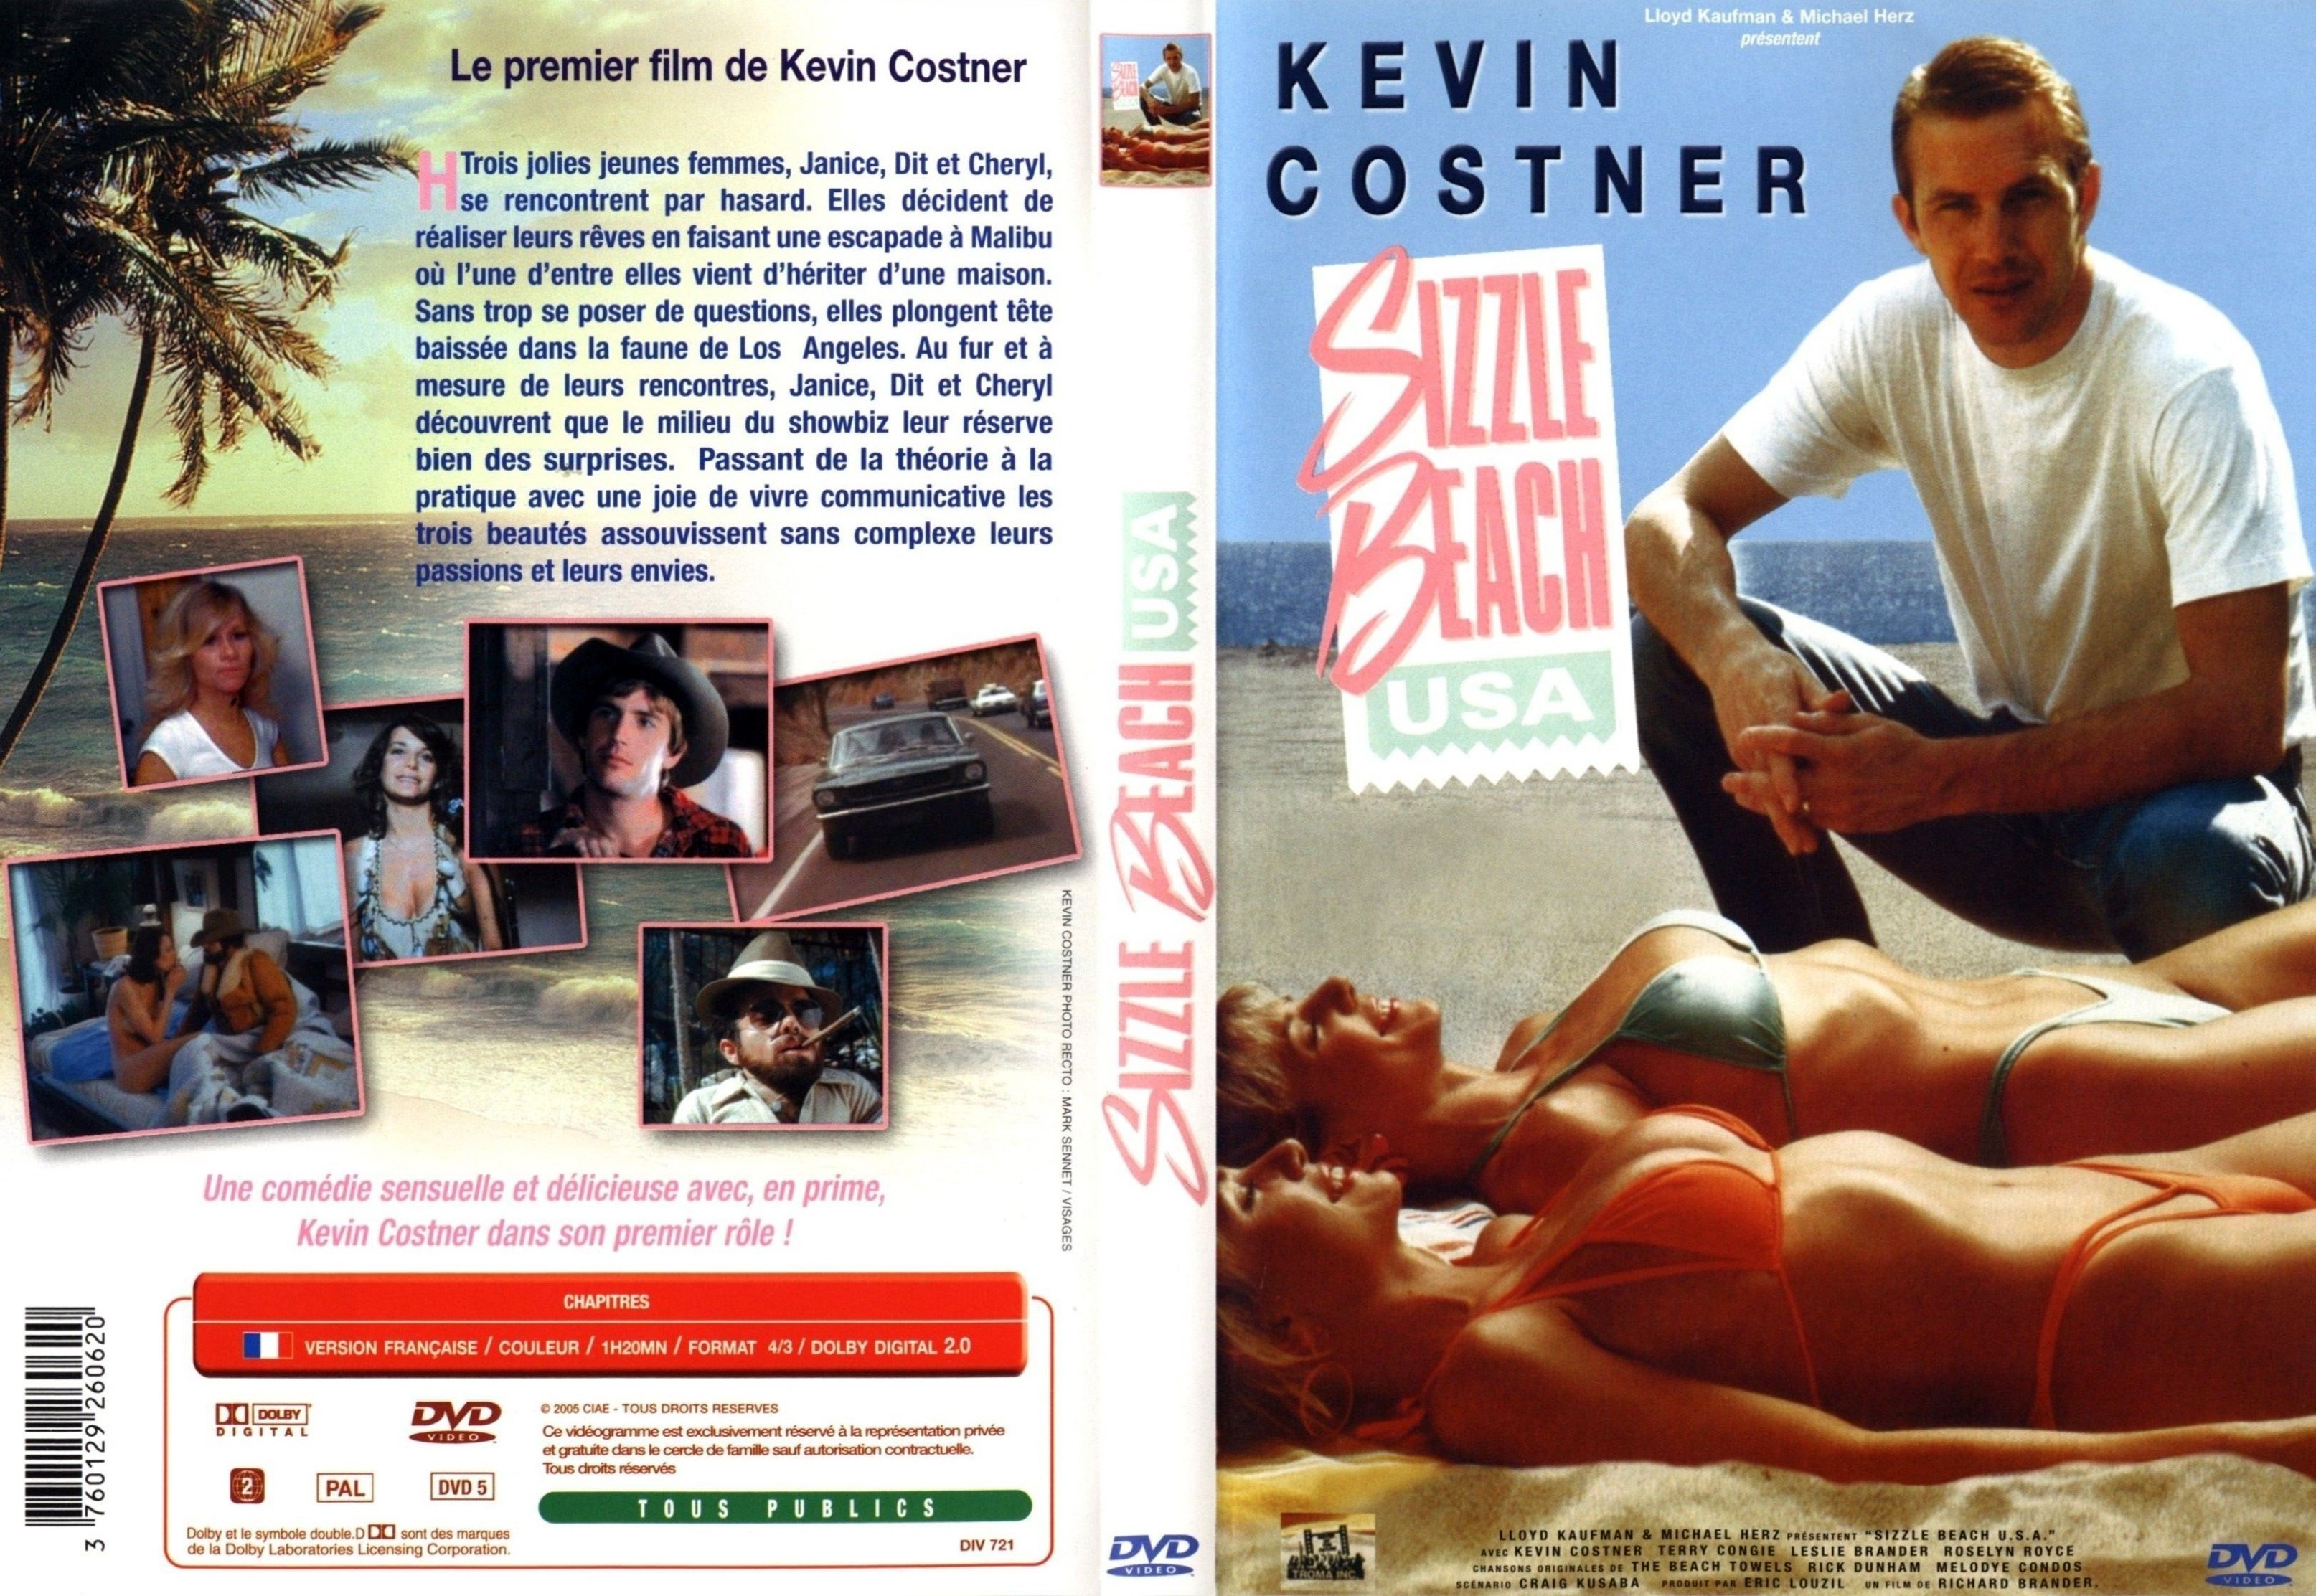 Jaquette DVD Sizzle beach USA